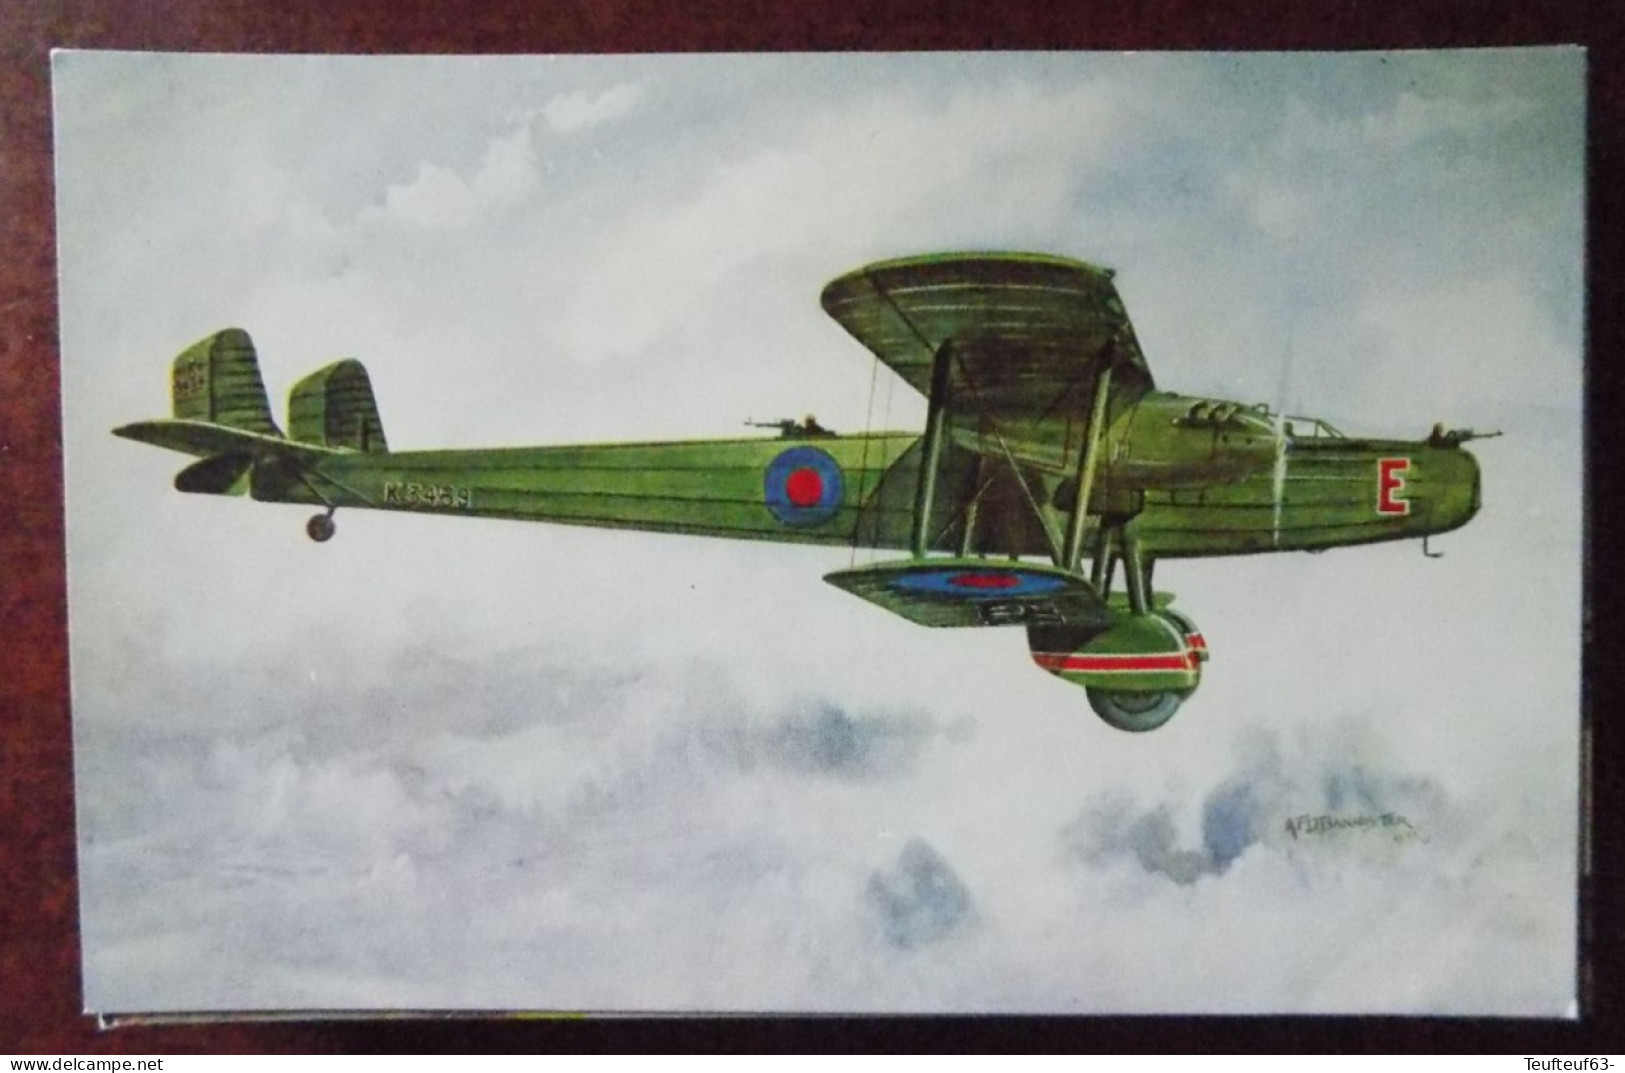 Cpa Handley Page " Heyford " - Long Range Night Bomber  - Ill. Bannister - 1919-1938: Entre Guerras